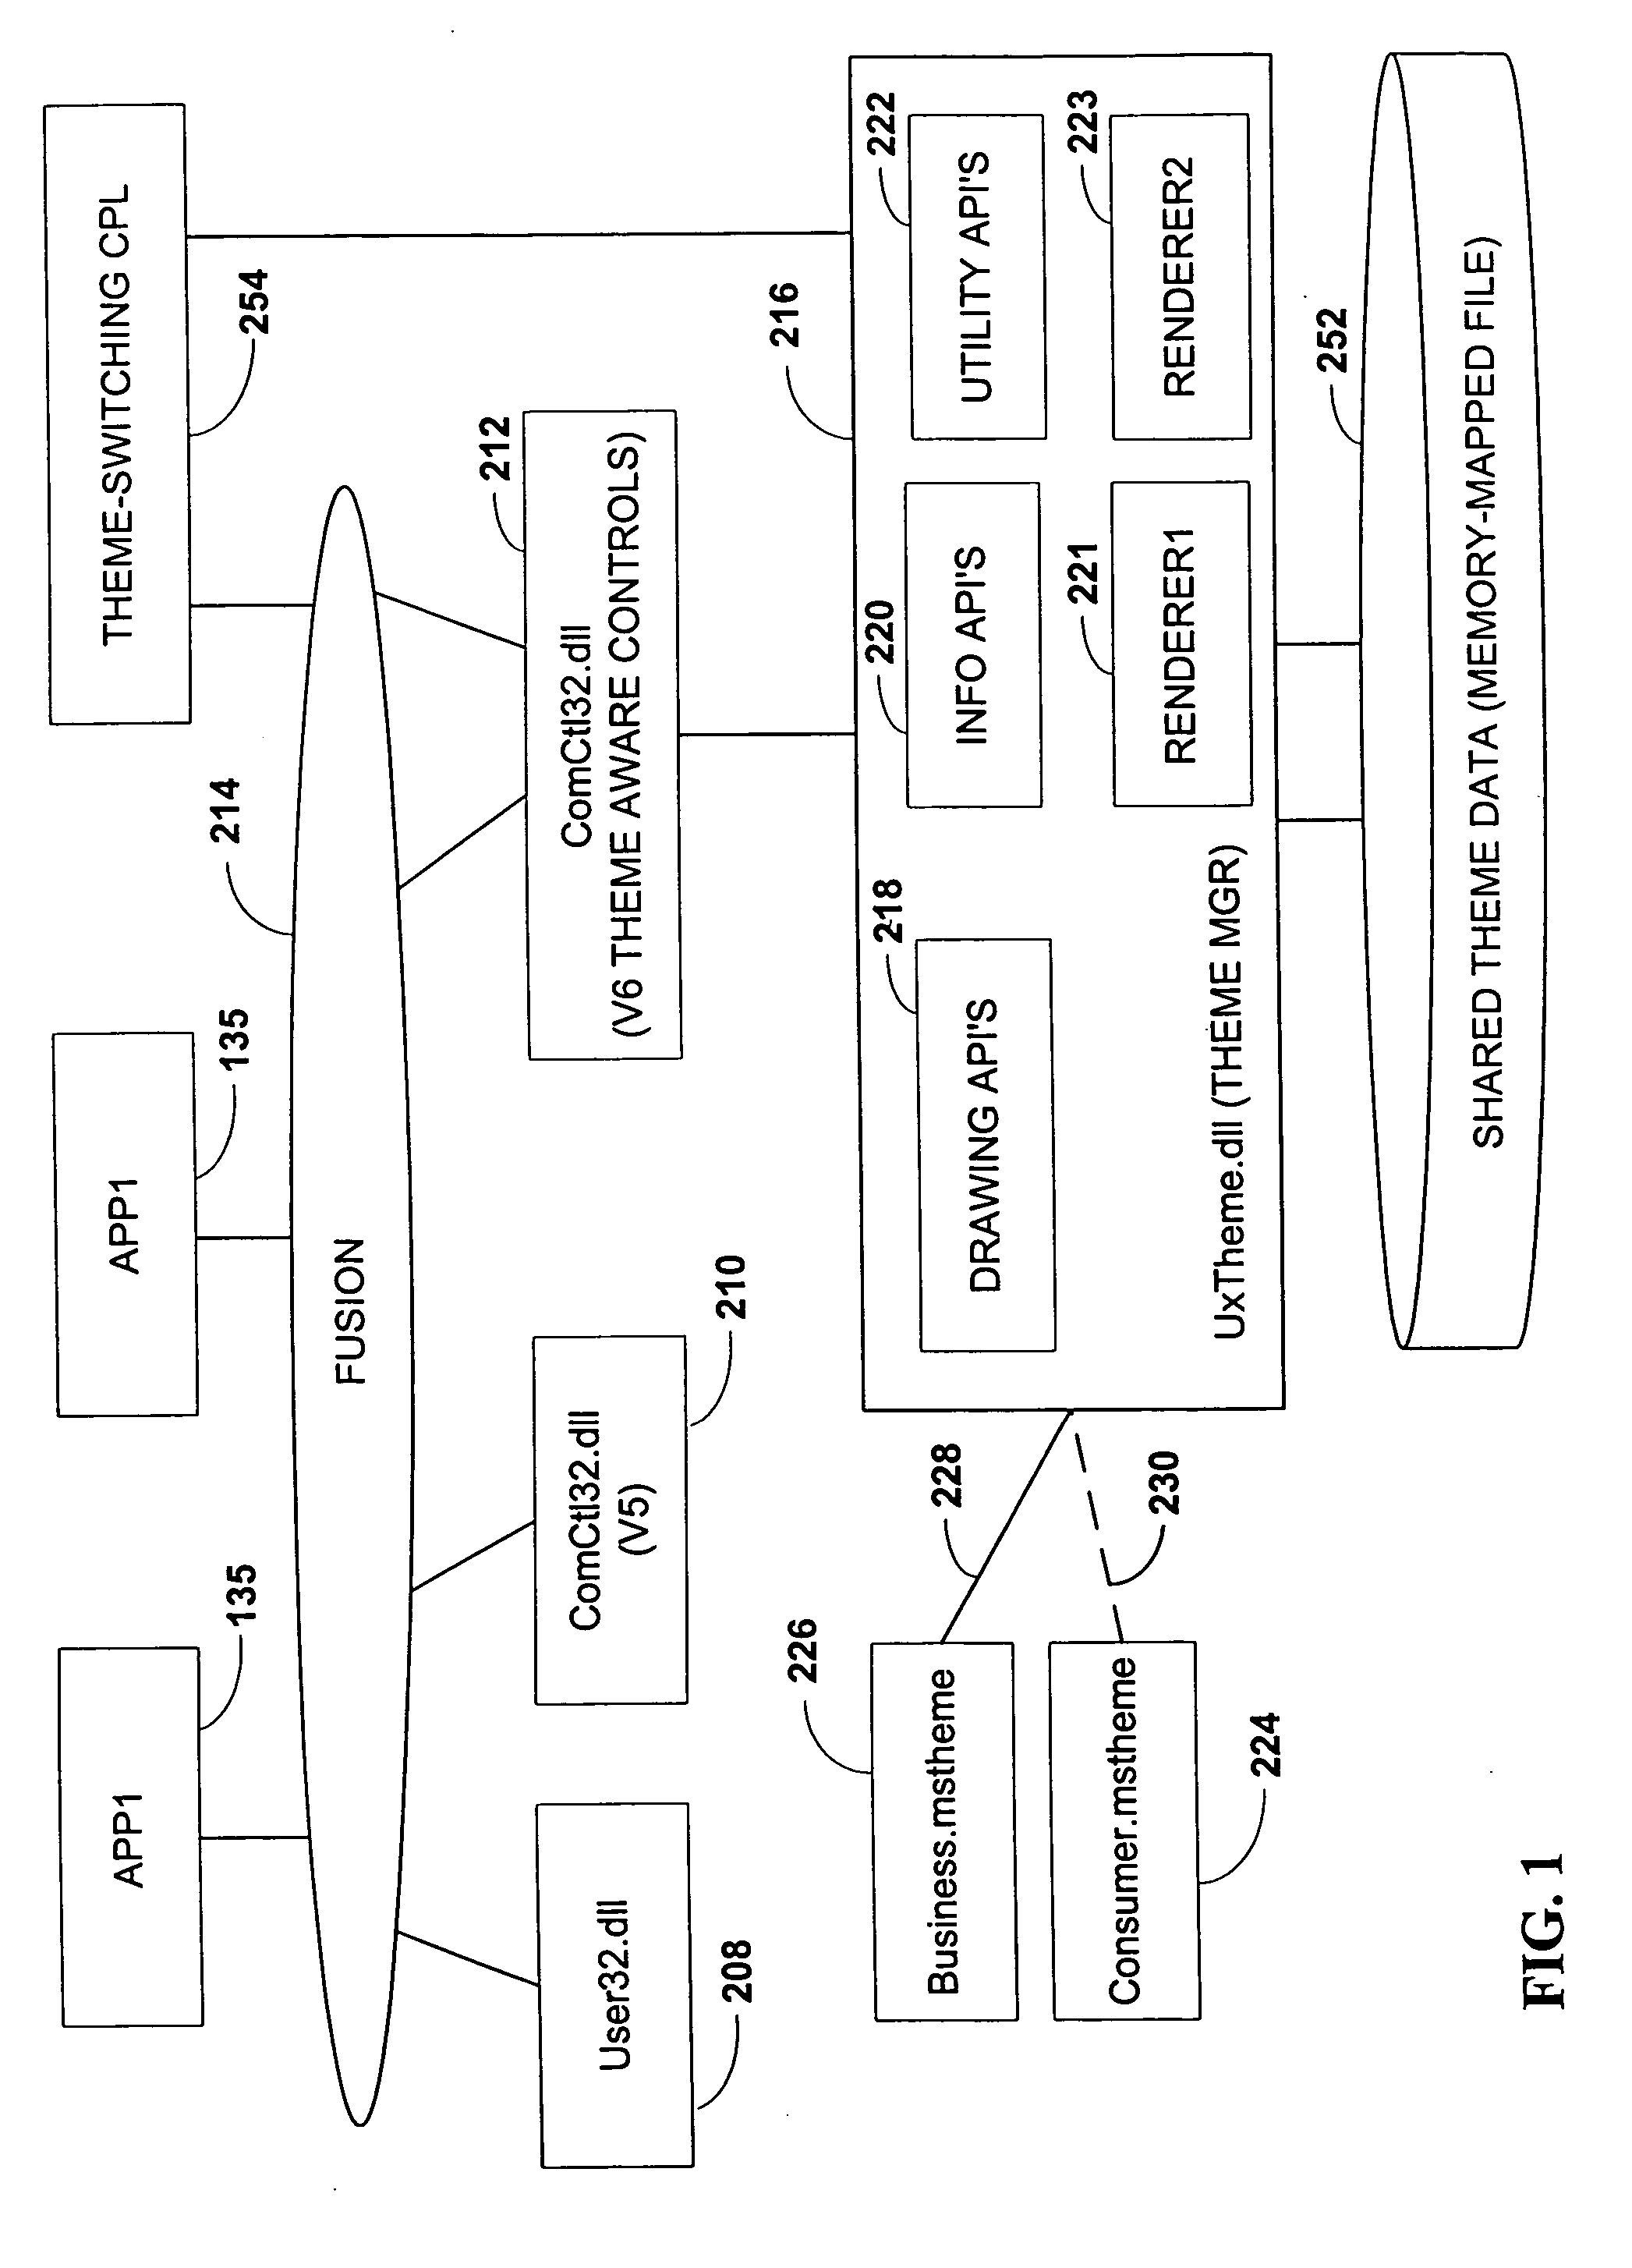 Binary cache file format for themeing the visual appearance of a computer system